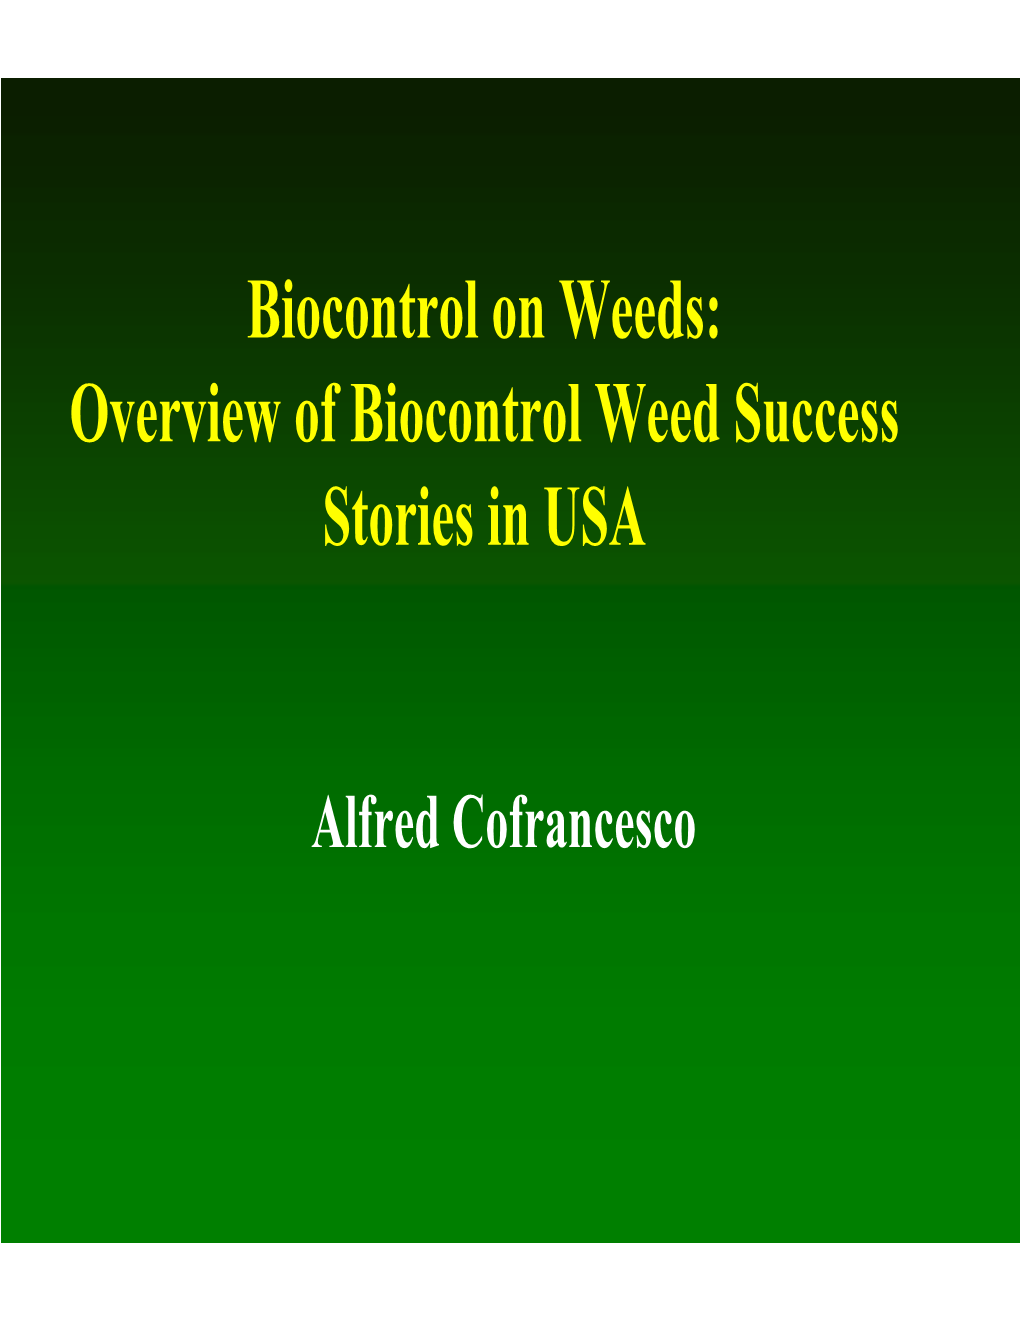 Biocontrol on Weeds: Overview of Biocontrol Weed Success Stories in USA